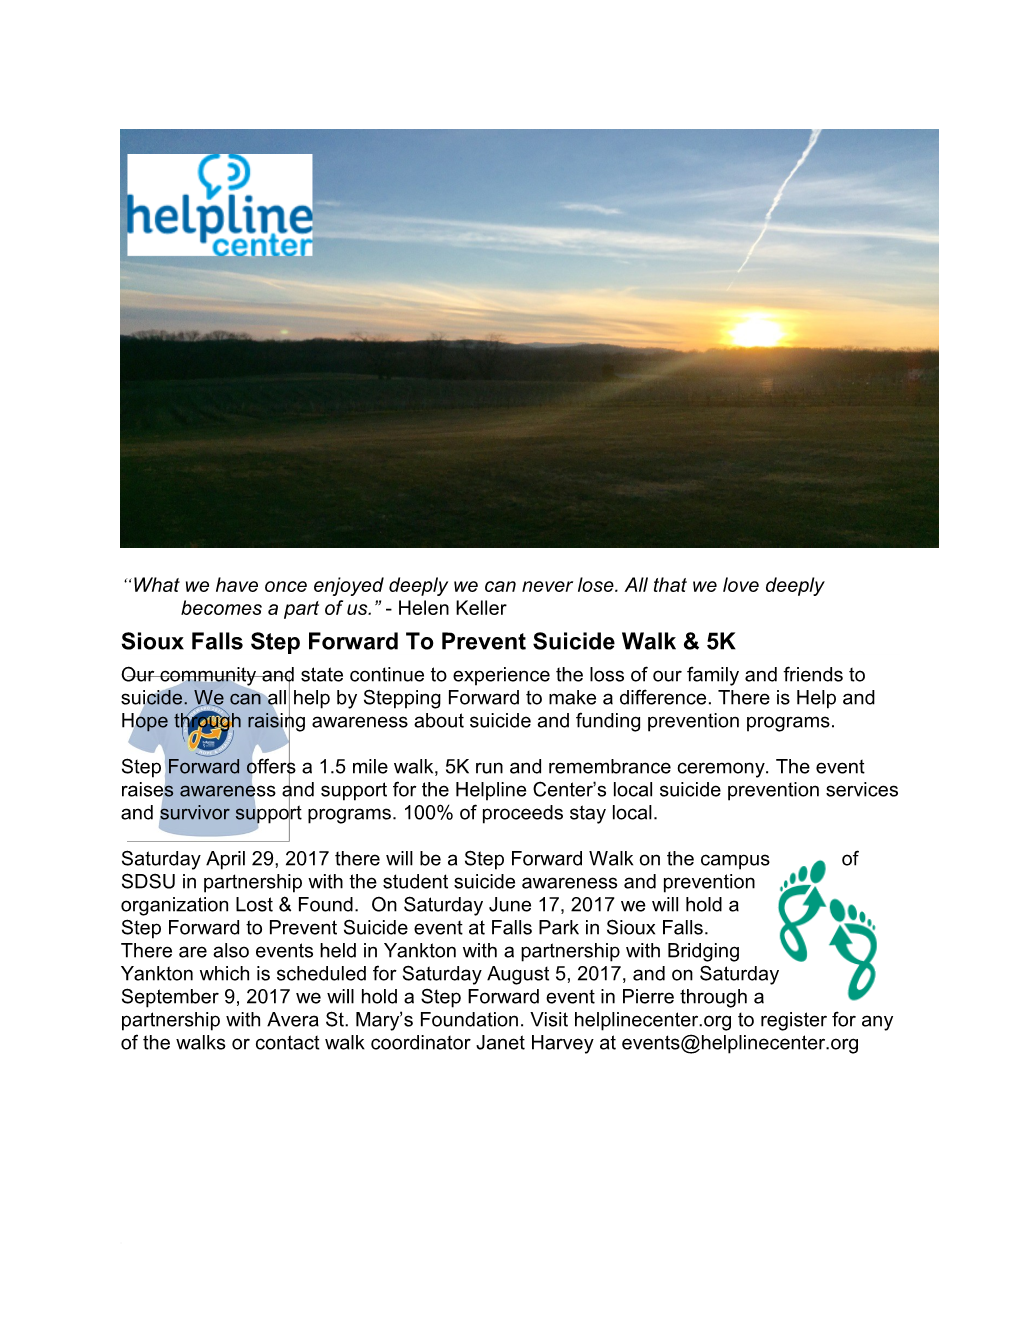 Sioux Falls Step Forward to Prevent Suicide Walk & 5K